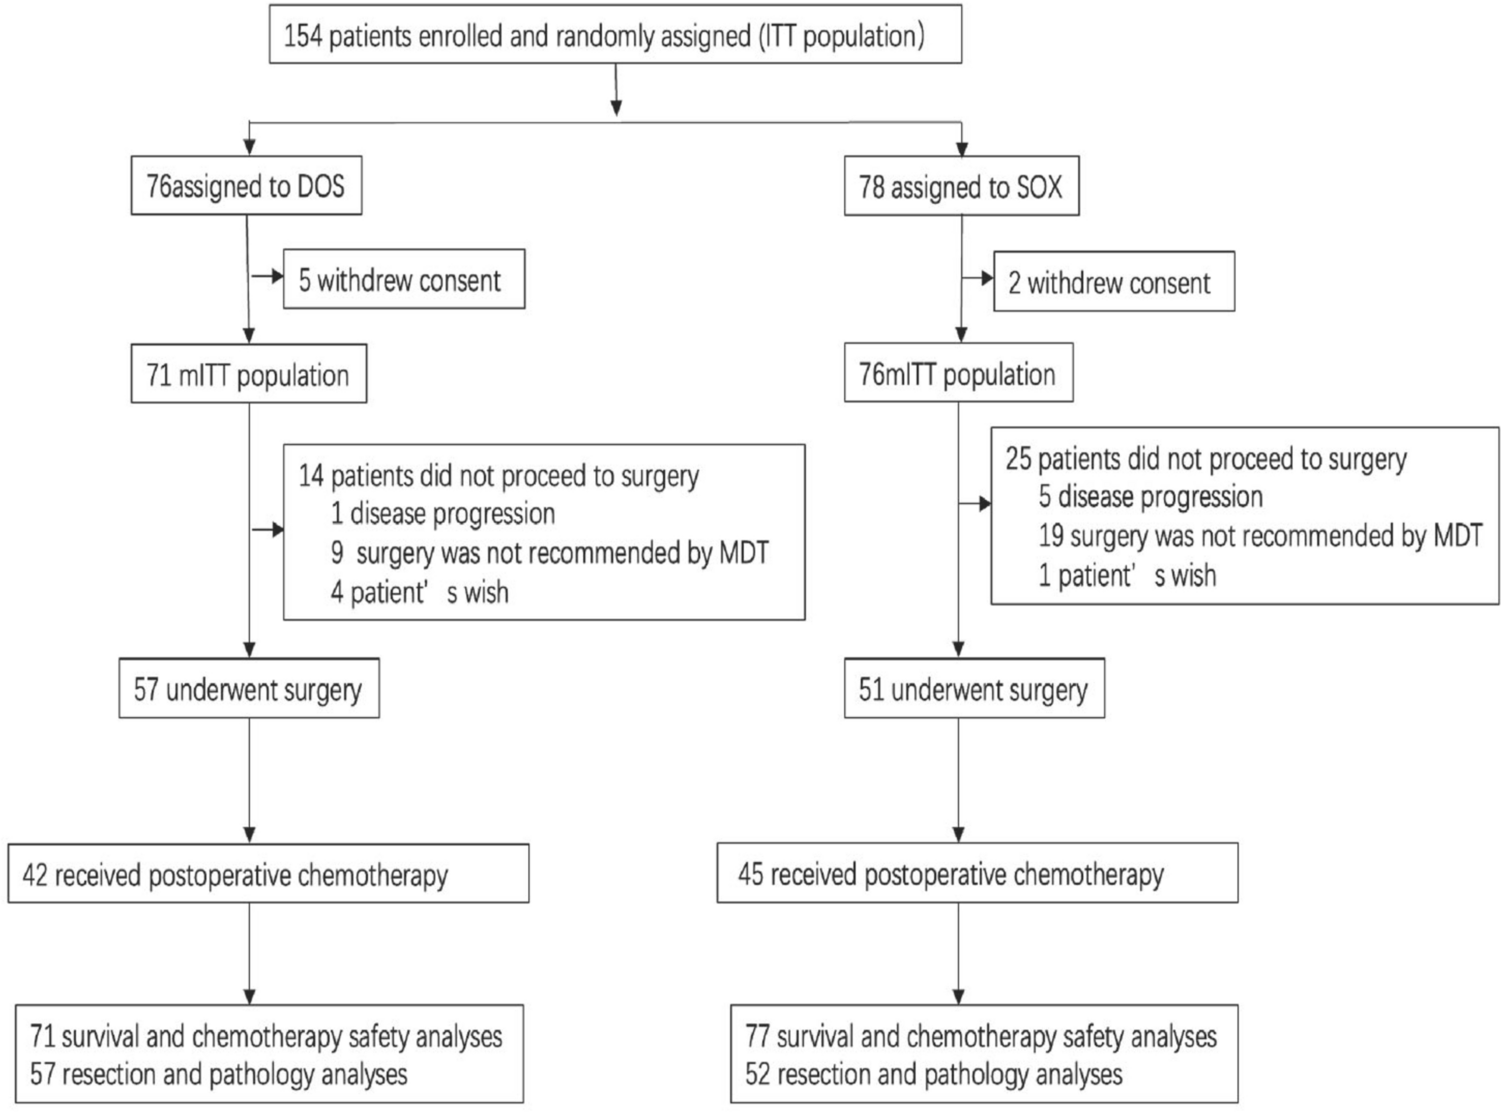 Perioperative chemotherapy with docetaxel plus oxaliplatin and S-1 (DOS) versus oxaliplatin plus S-1 (SOX) for the treatment of locally advanced gastric or gastro-esophageal junction adenocarcinoma (MATCH): an open-label, randomized, phase 2 clinical trial